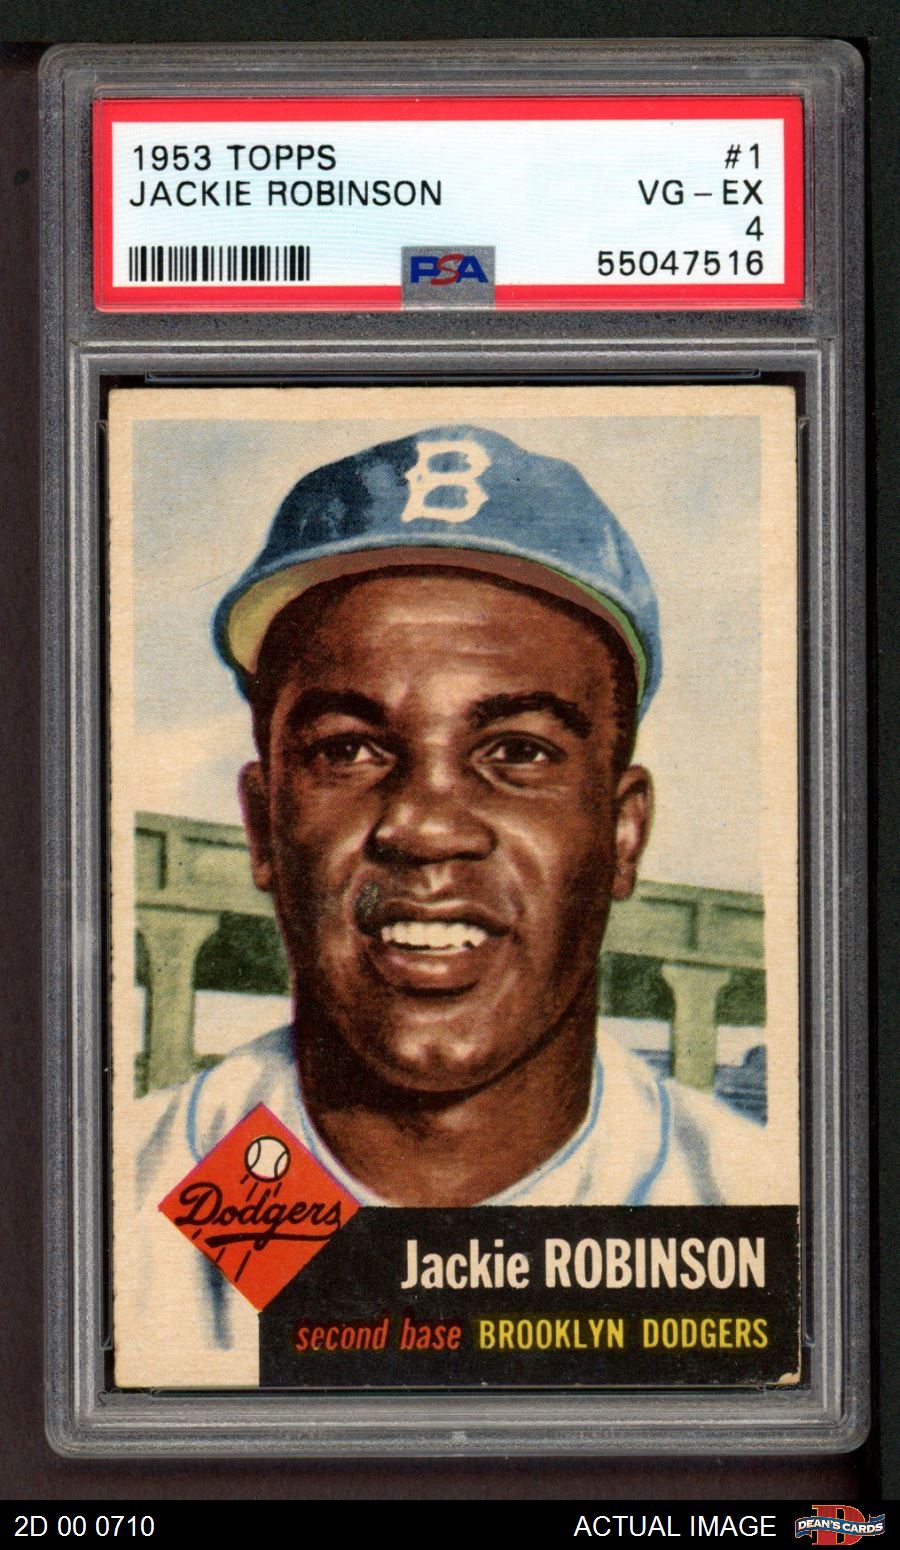 Jackie Robinson - Jackie Robinson baseball card from 1953, front and back